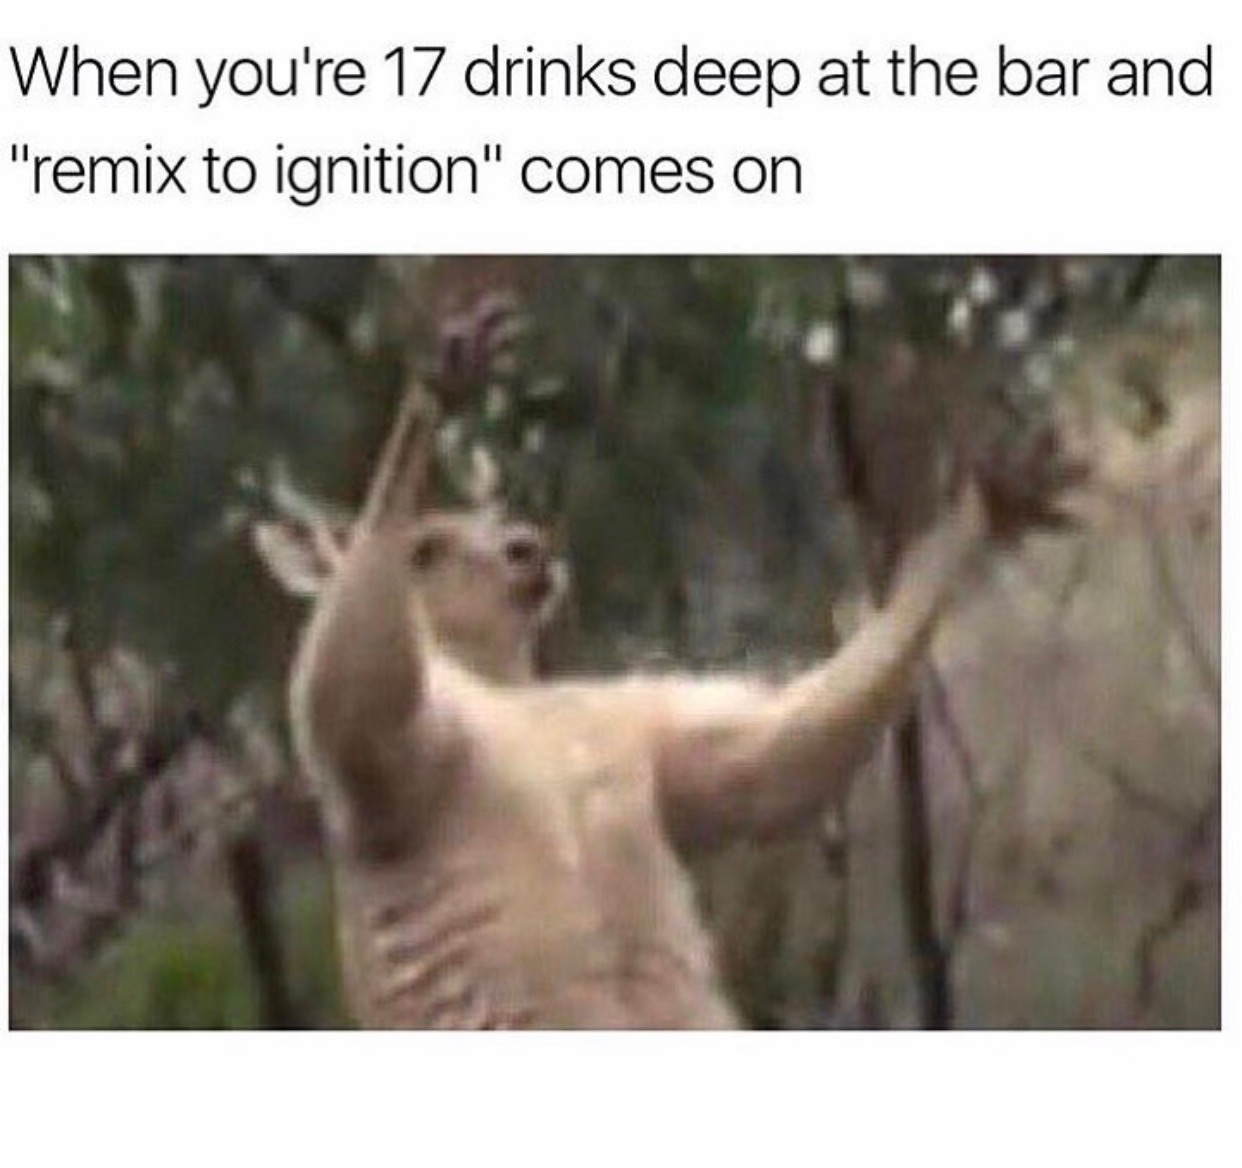 memes - killers mr brightside meme - When you're 17 drinks deep at the bar and "remix to ignition" comes on